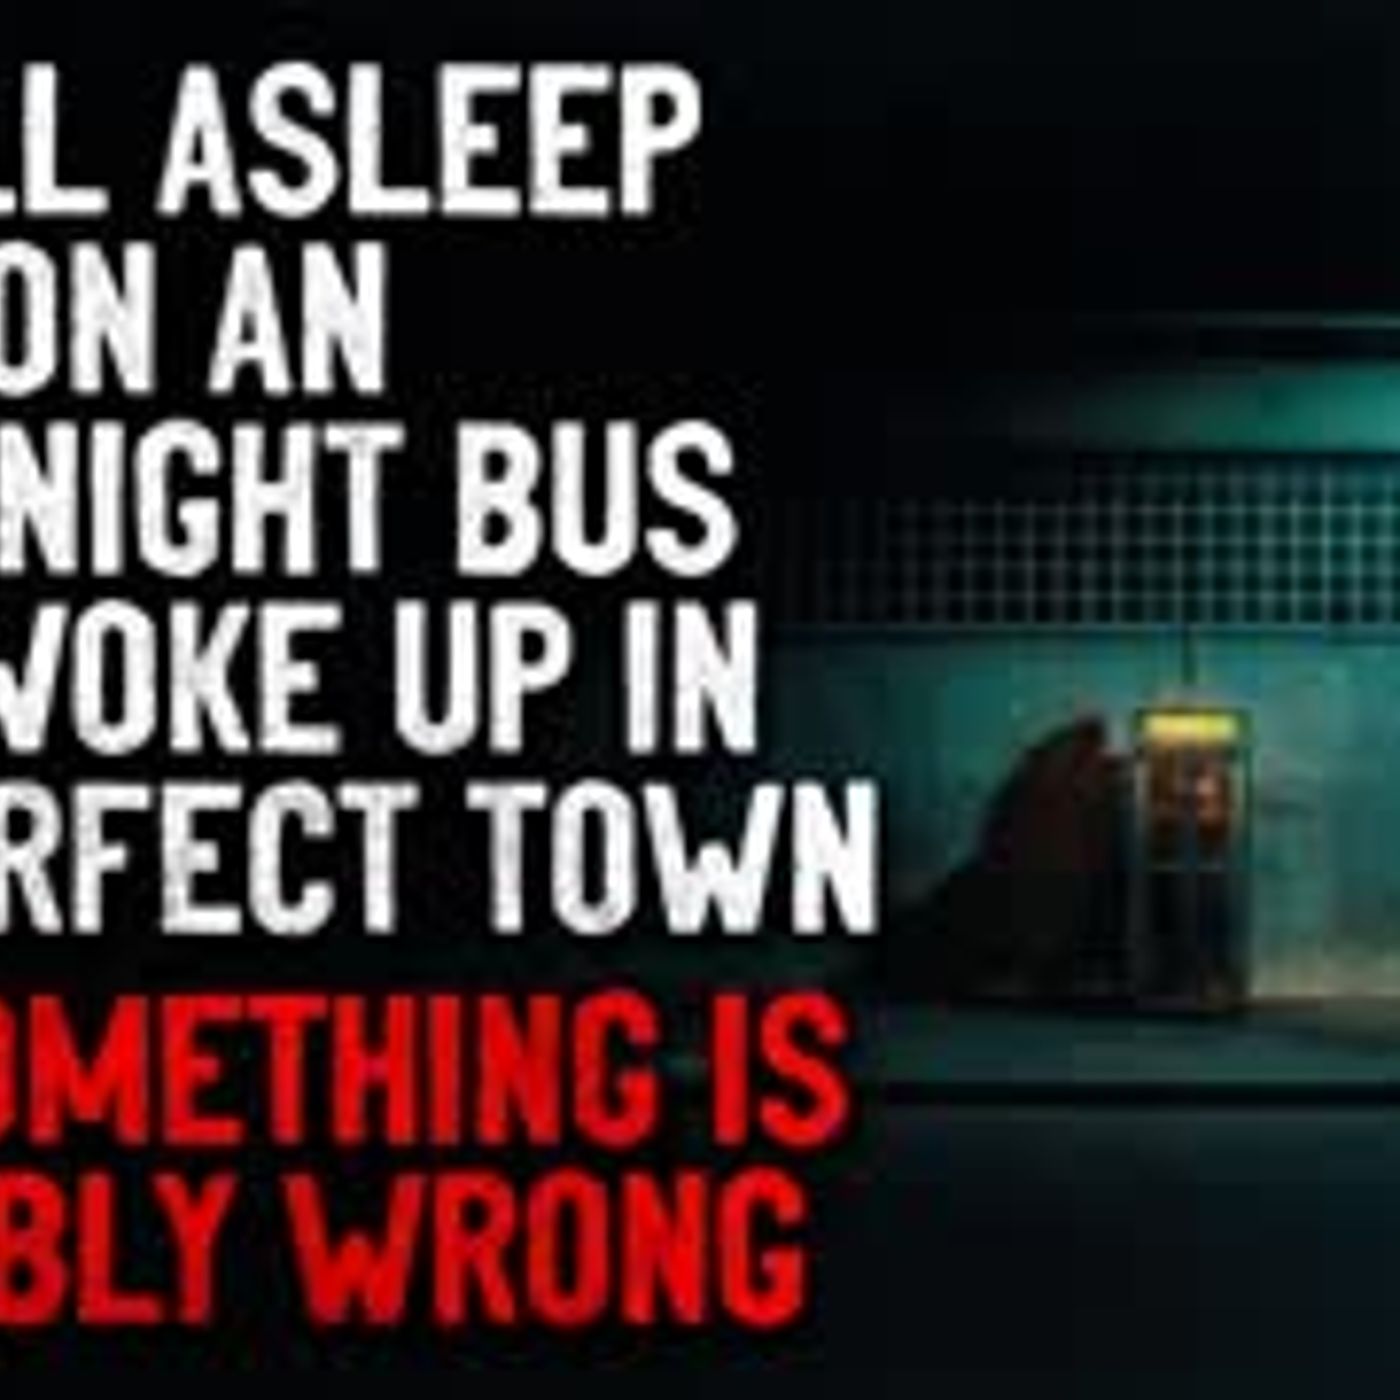 ”I fell asleep on an overnight bus and woke up in the perfect town” Creepypasta